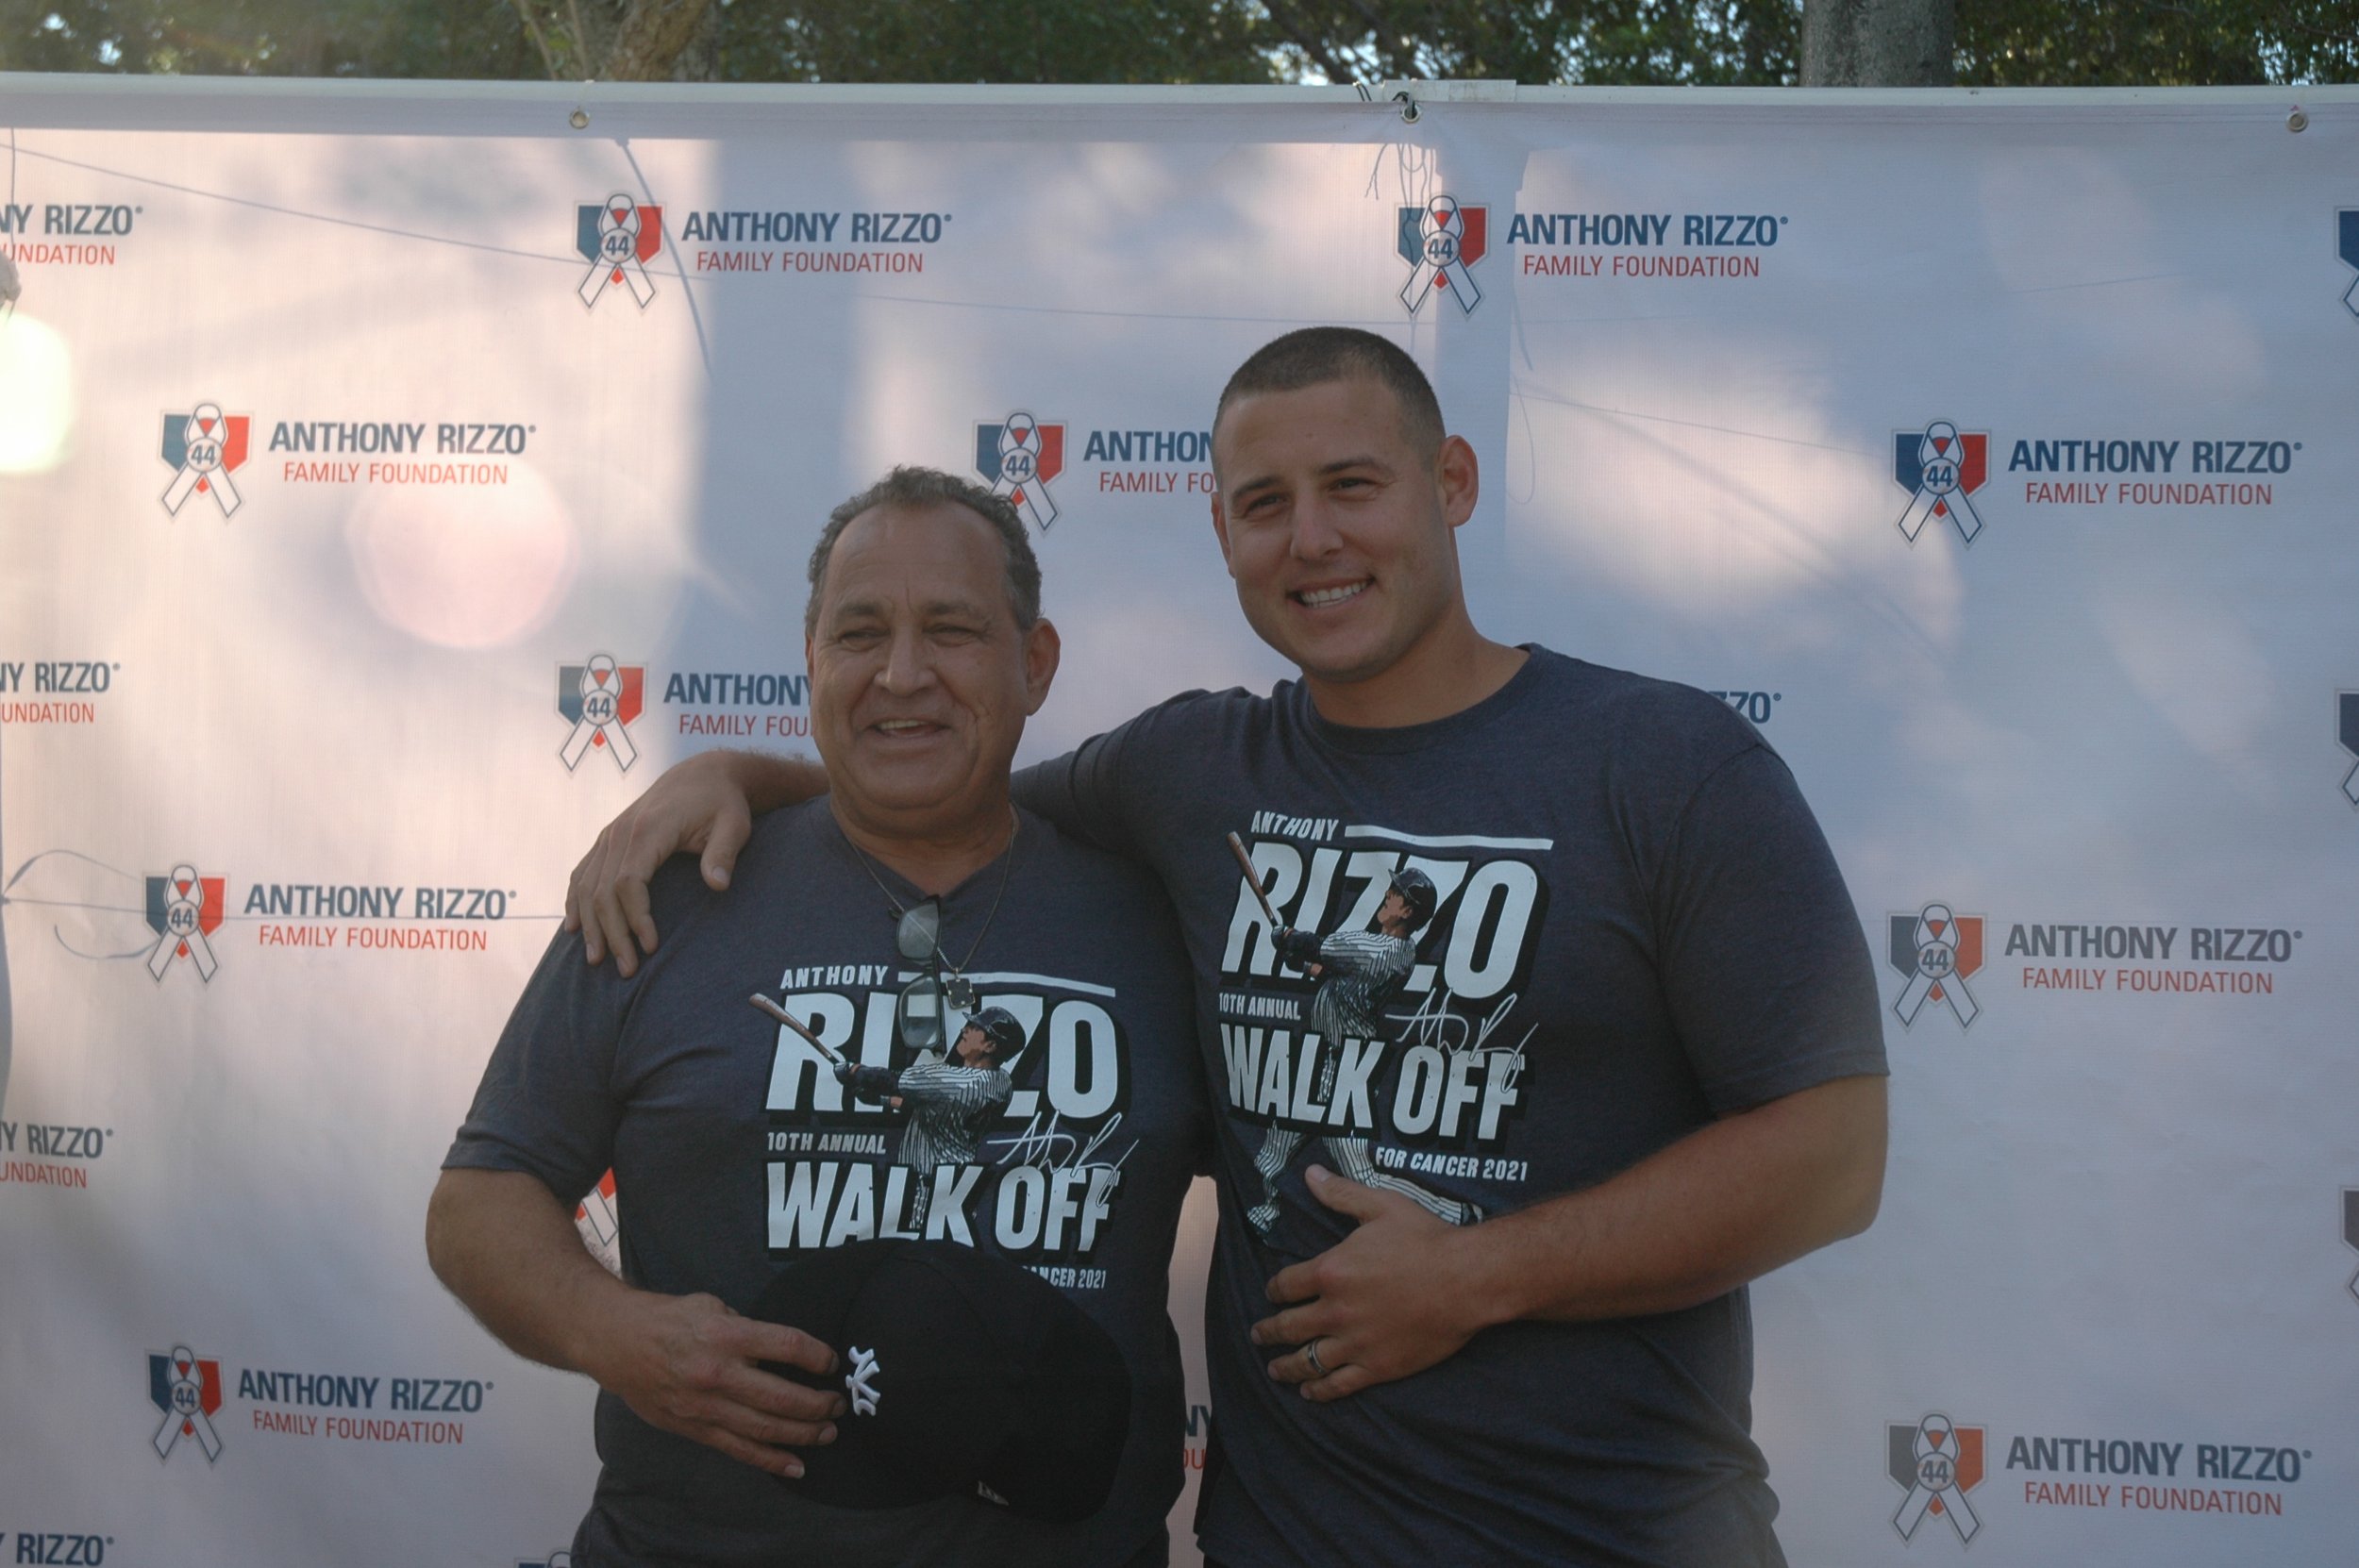 Walk-Off for Cancer 2021 — Anthony Rizzo Family Foundation